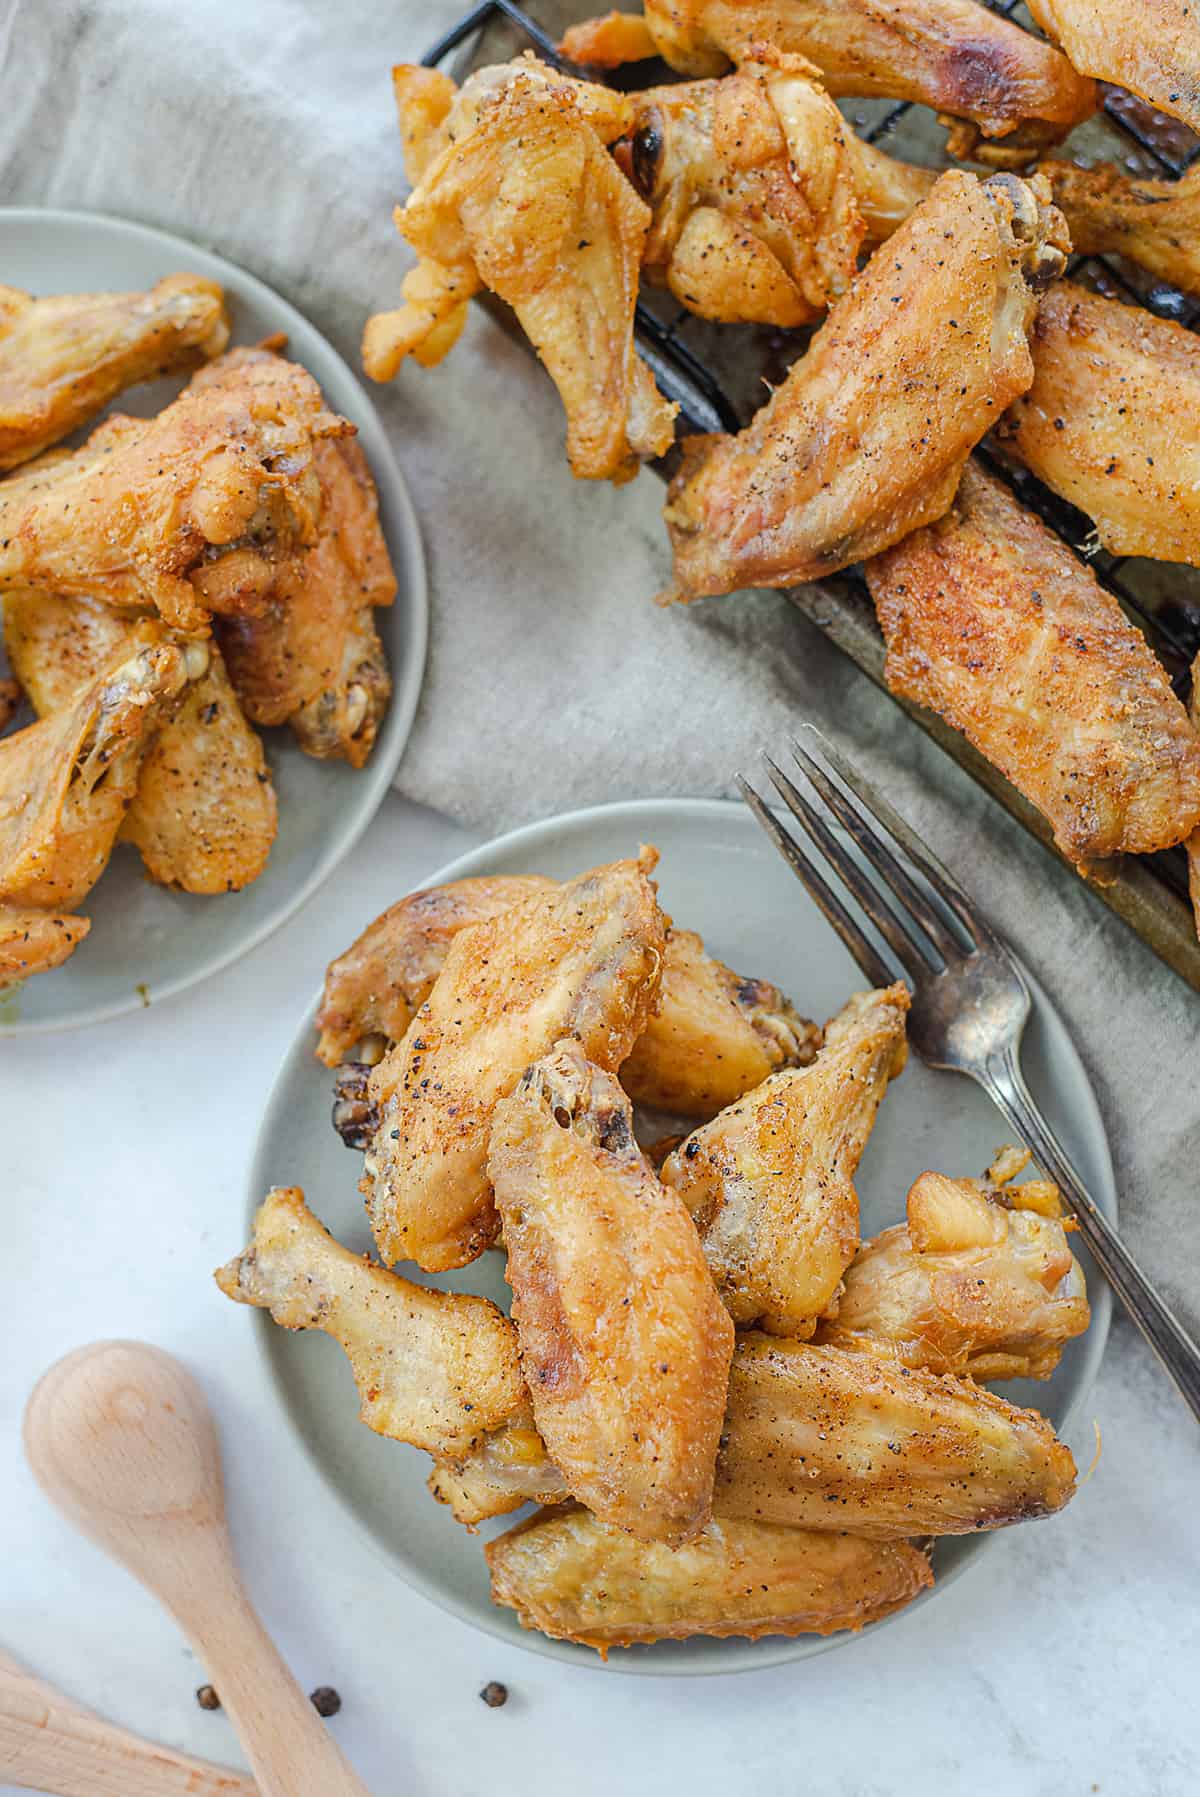 crispy baked chicken wings on plates.